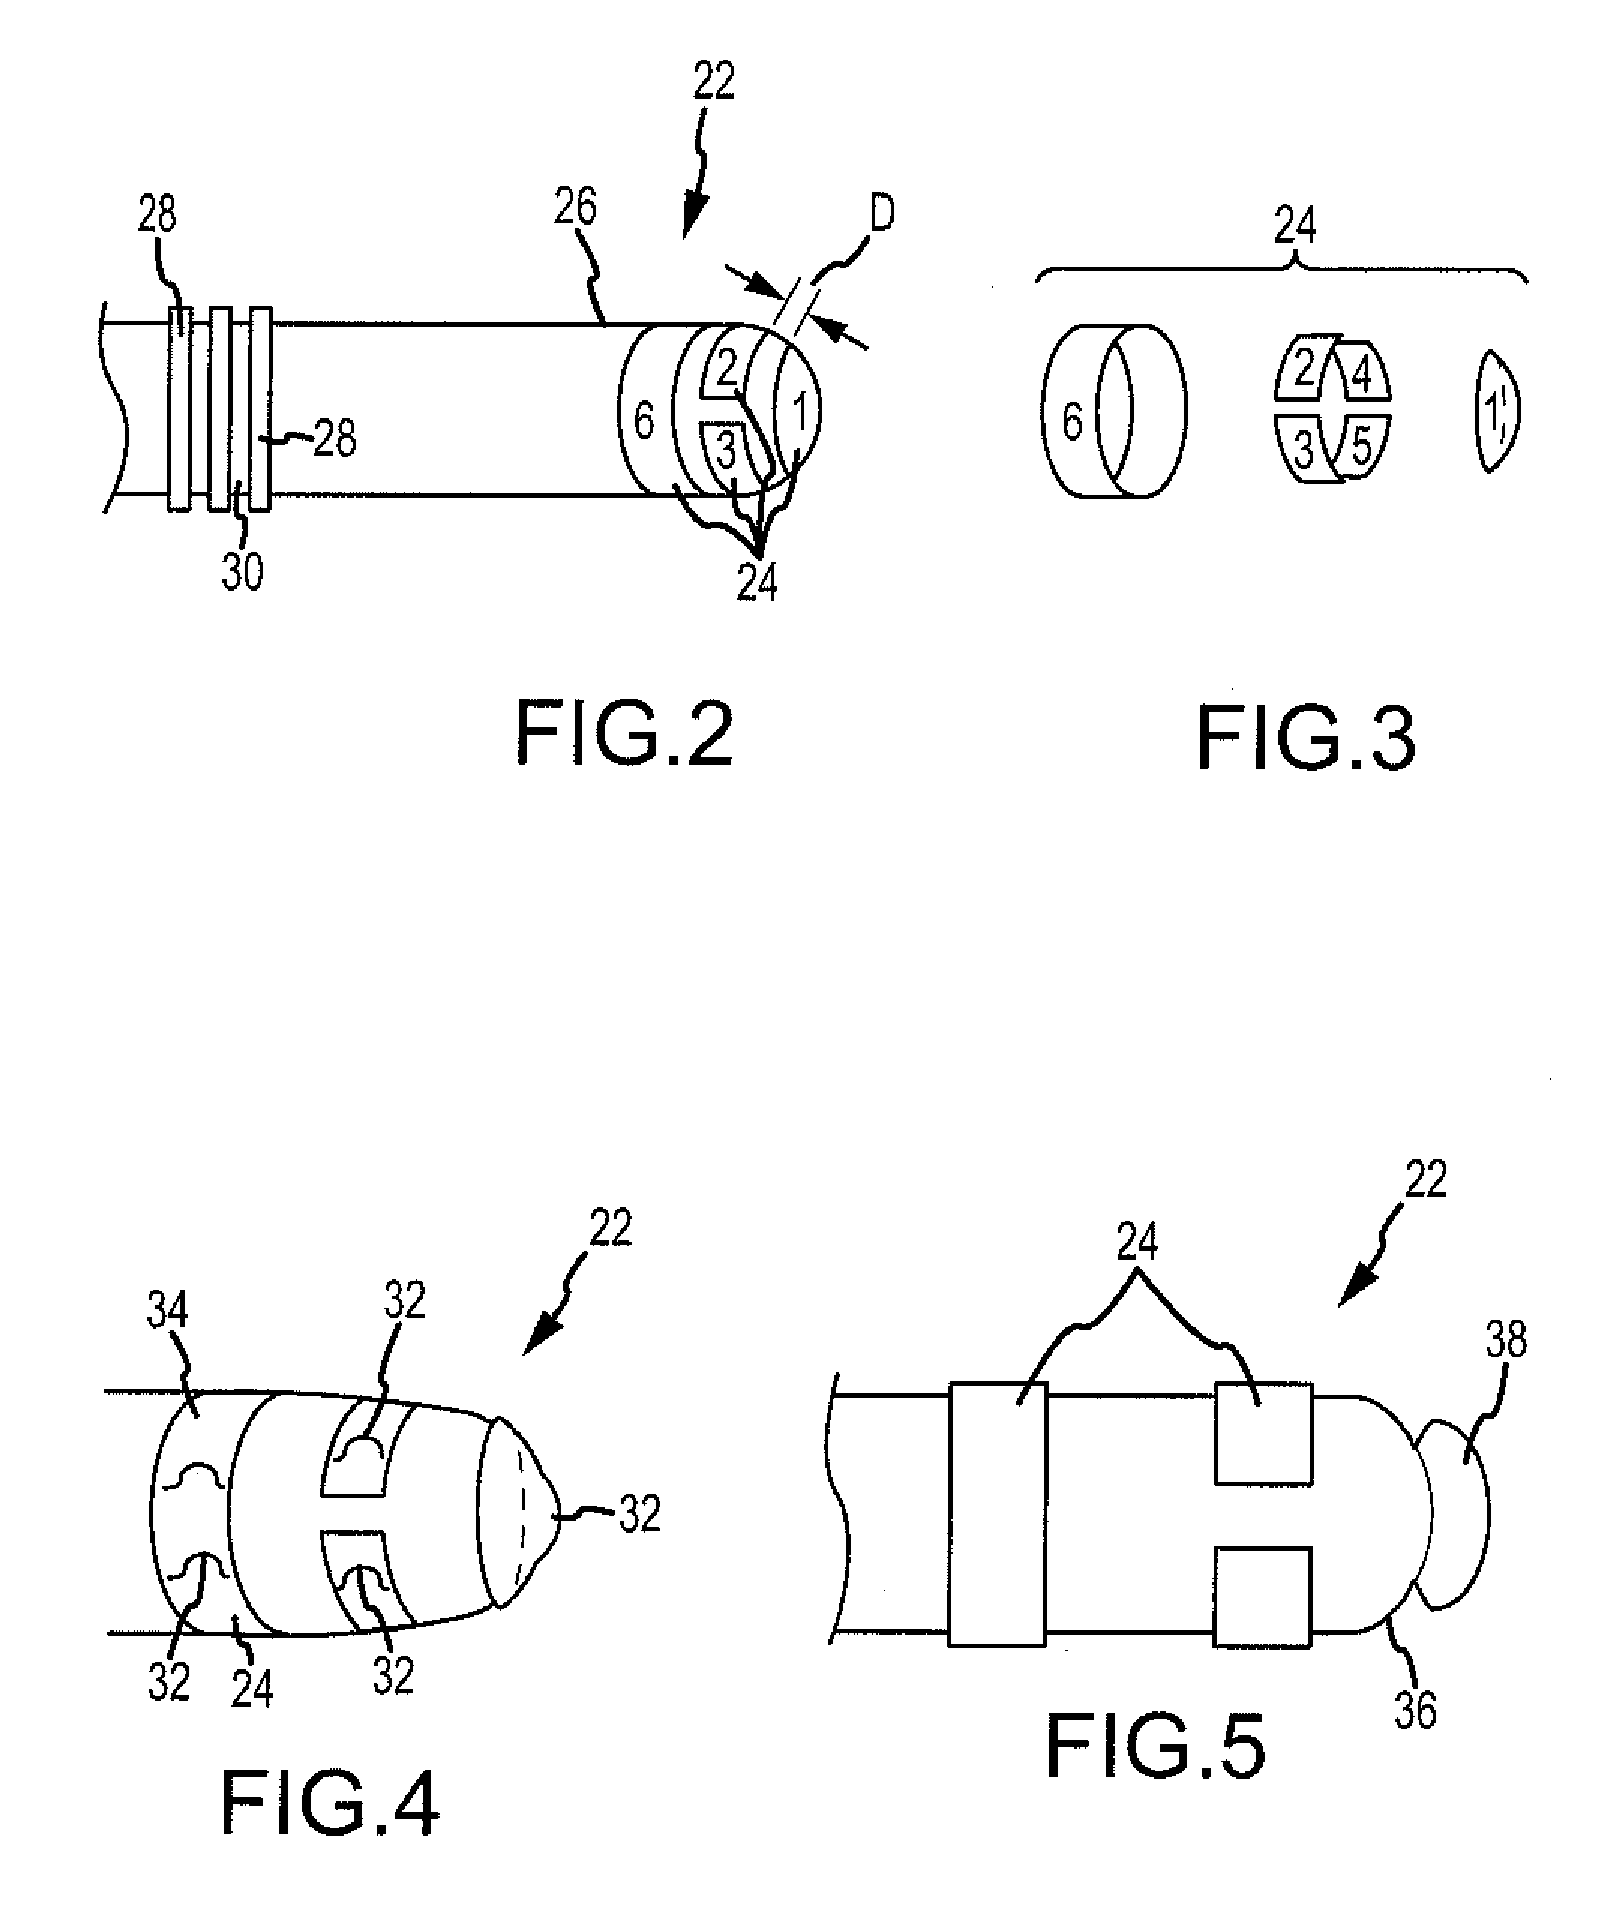 Multi-electrode ablation sensing catheter and system